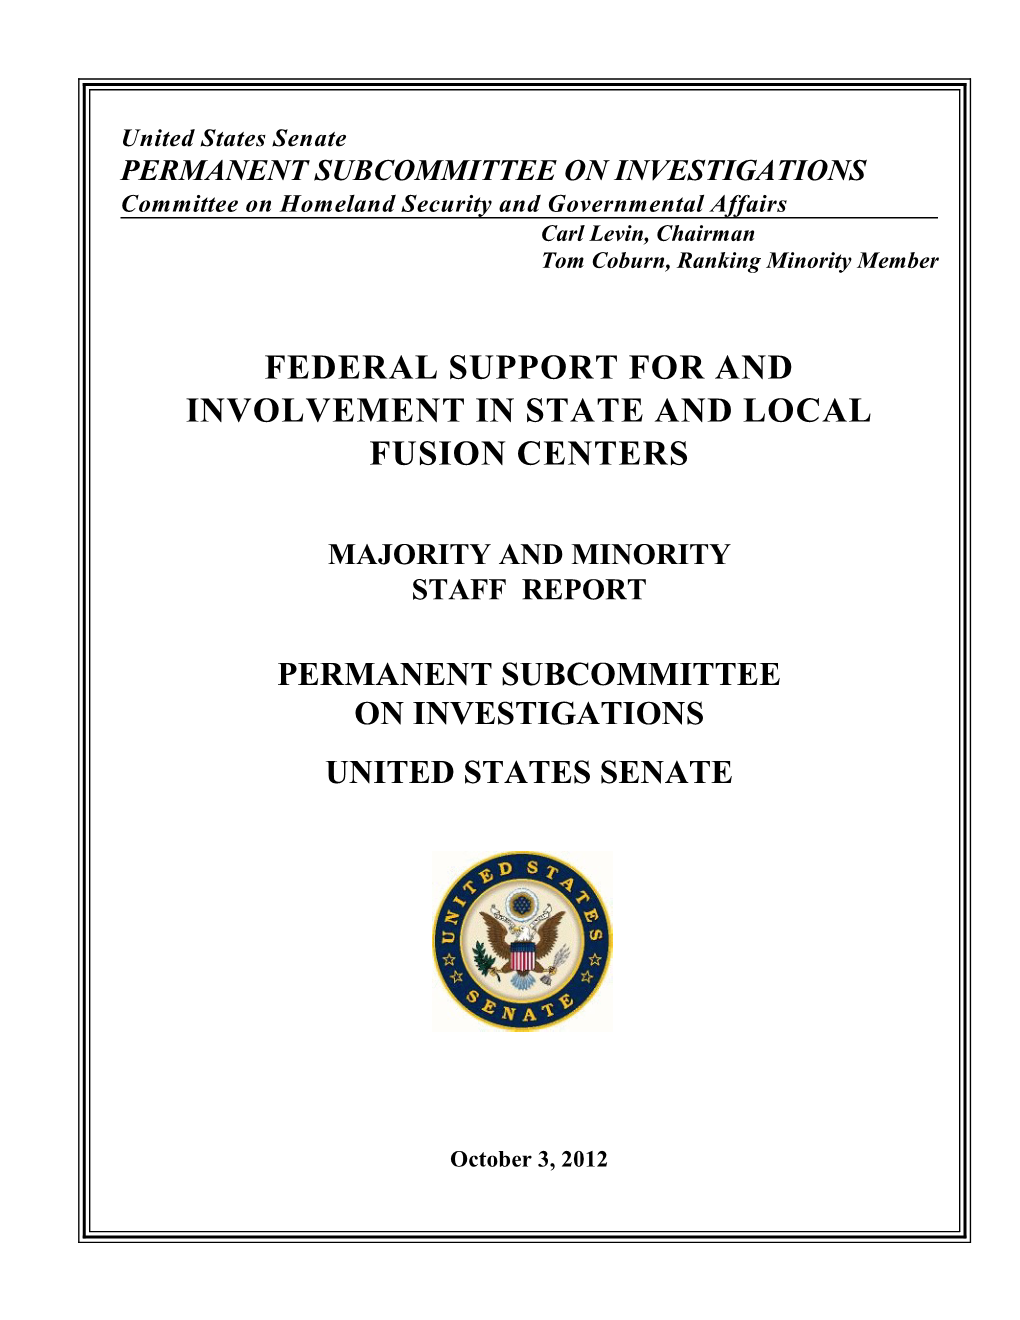 Federal Support for and Involvement in State and Local Fusions Centers